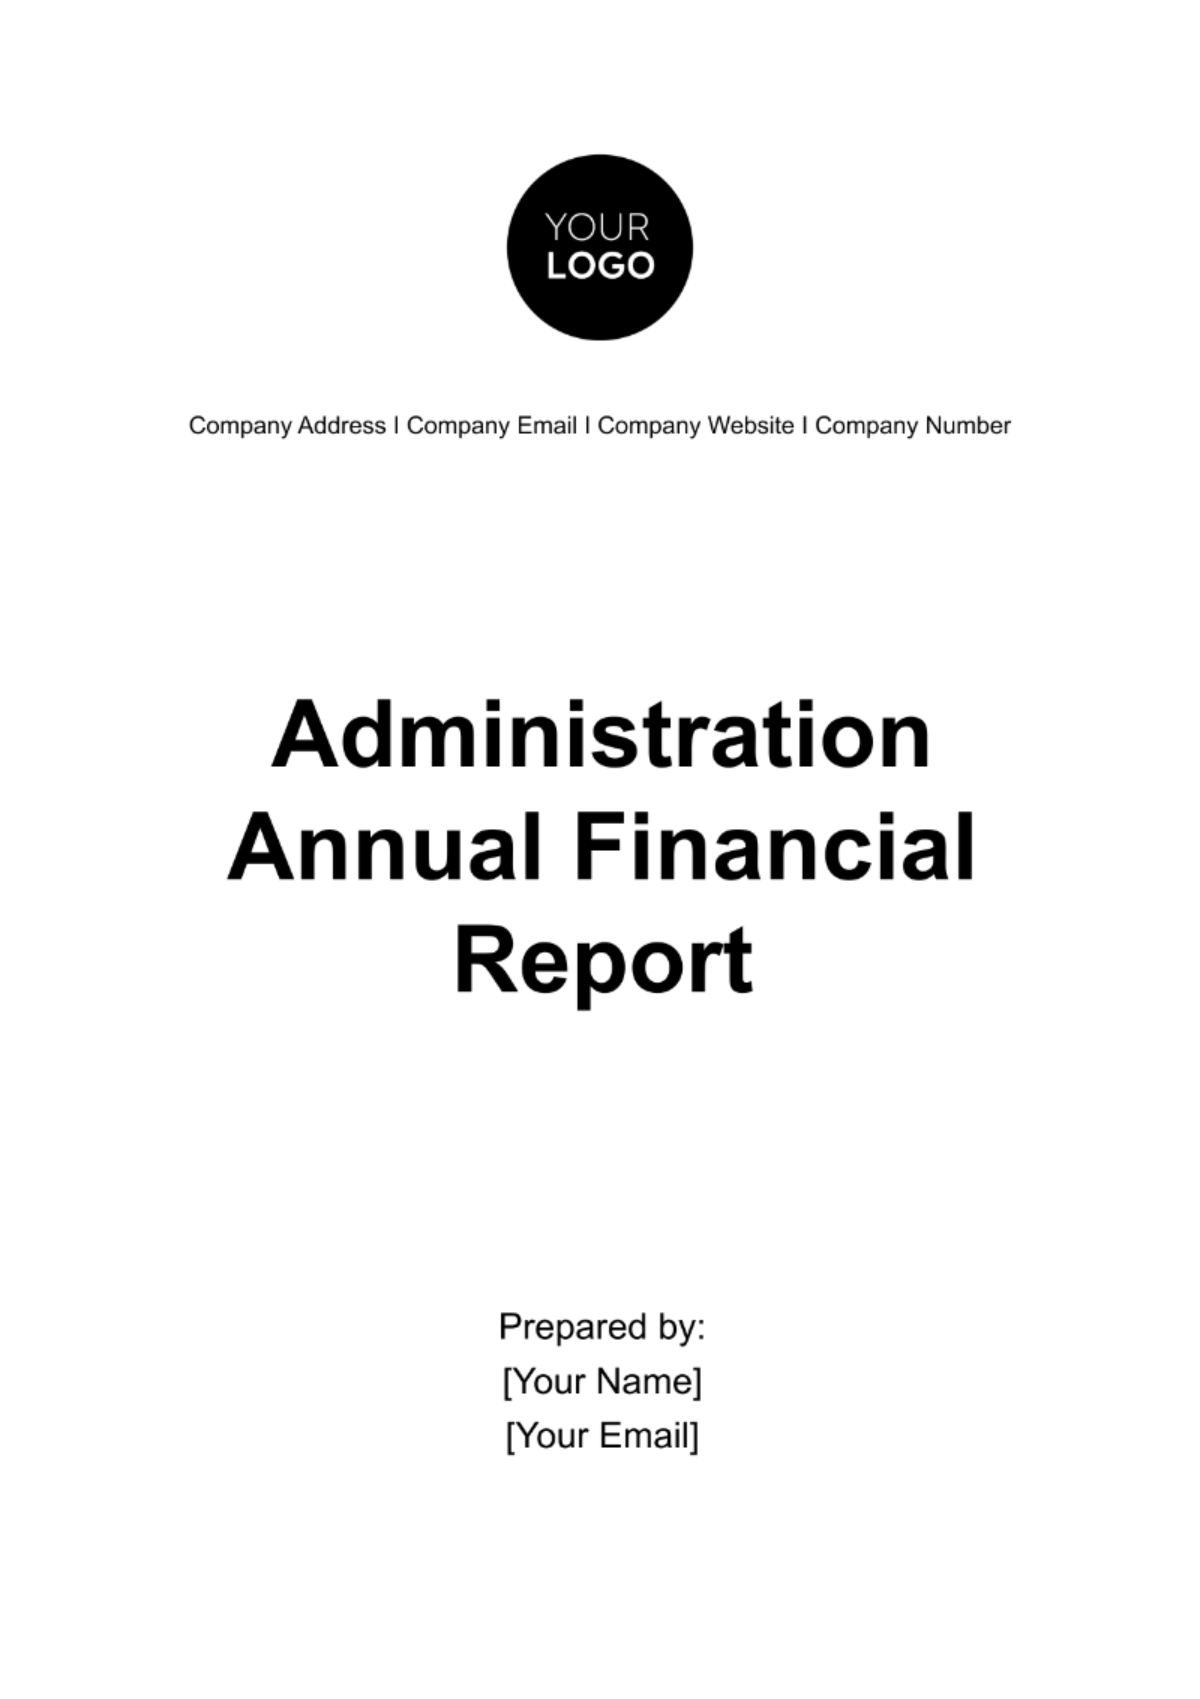 Administration Annual Financial Report Template